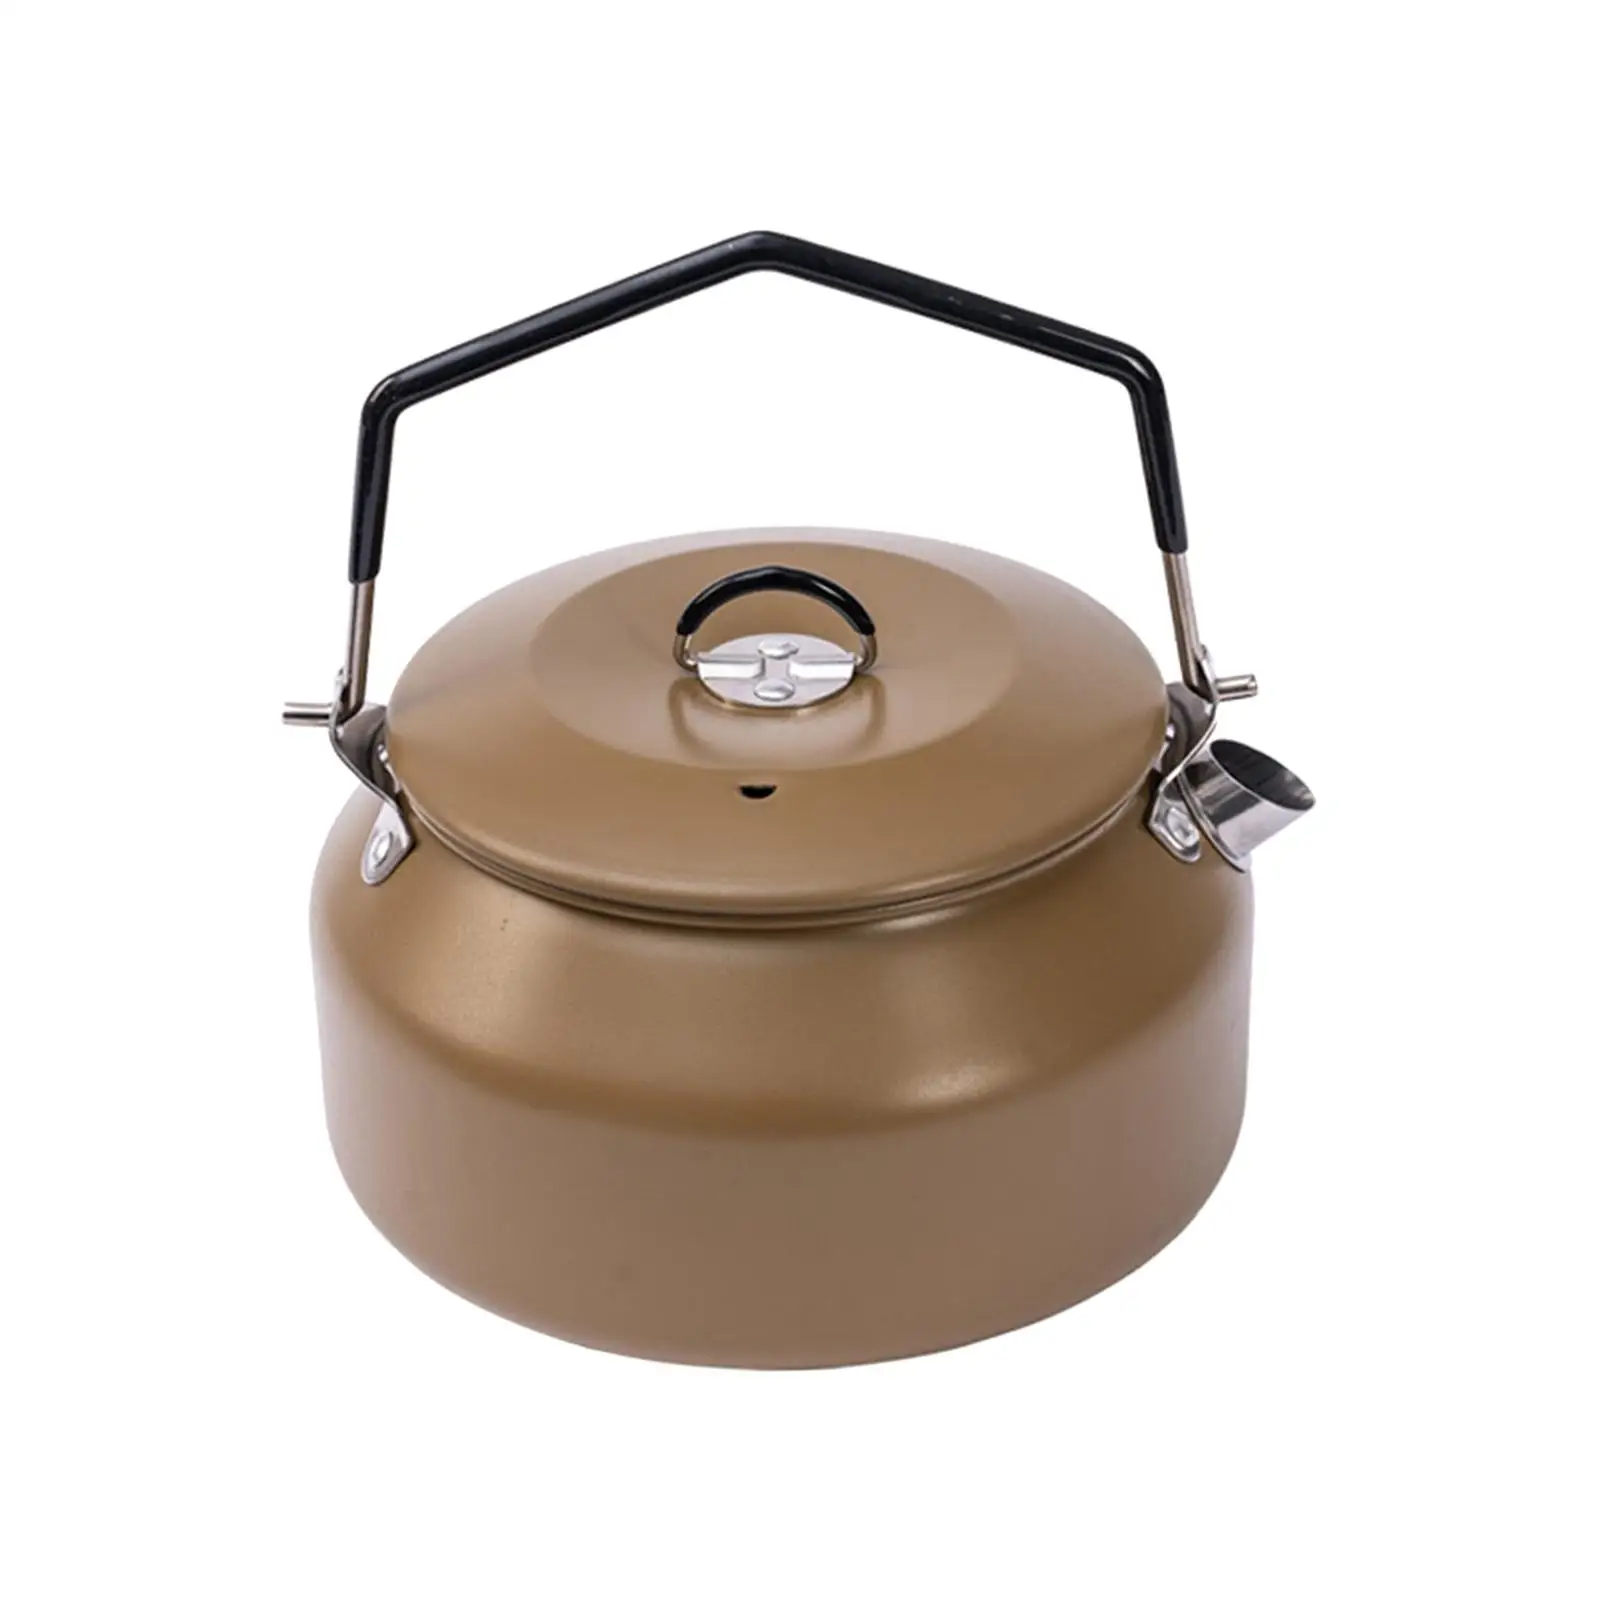 Camping Water Kettle Teapot Coffee Pot for Backpacking Hiking Barbecue